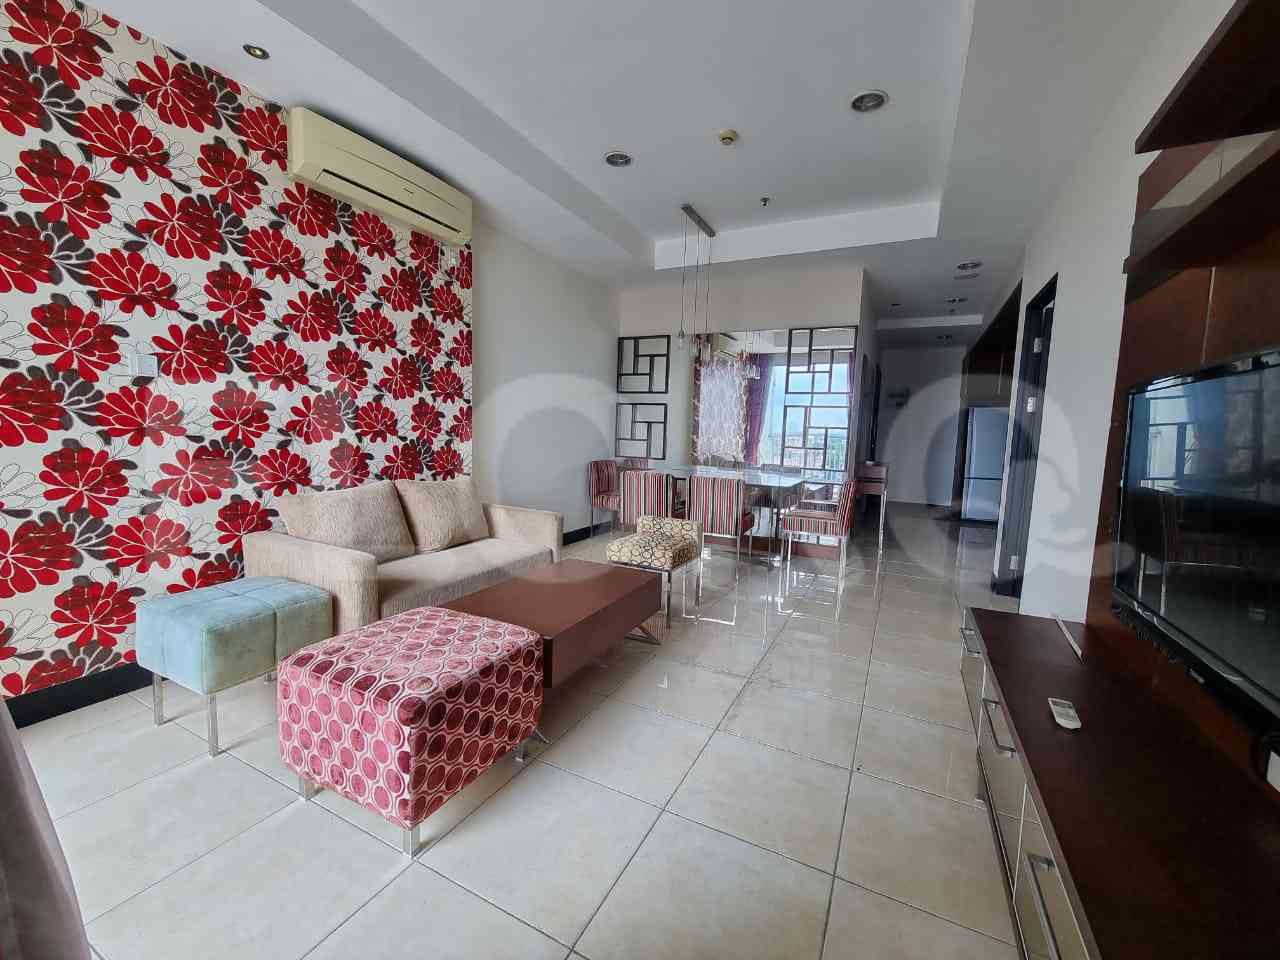 2 Bedroom on 6th Floor for Rent in Essence Darmawangsa Apartment - fci940 1